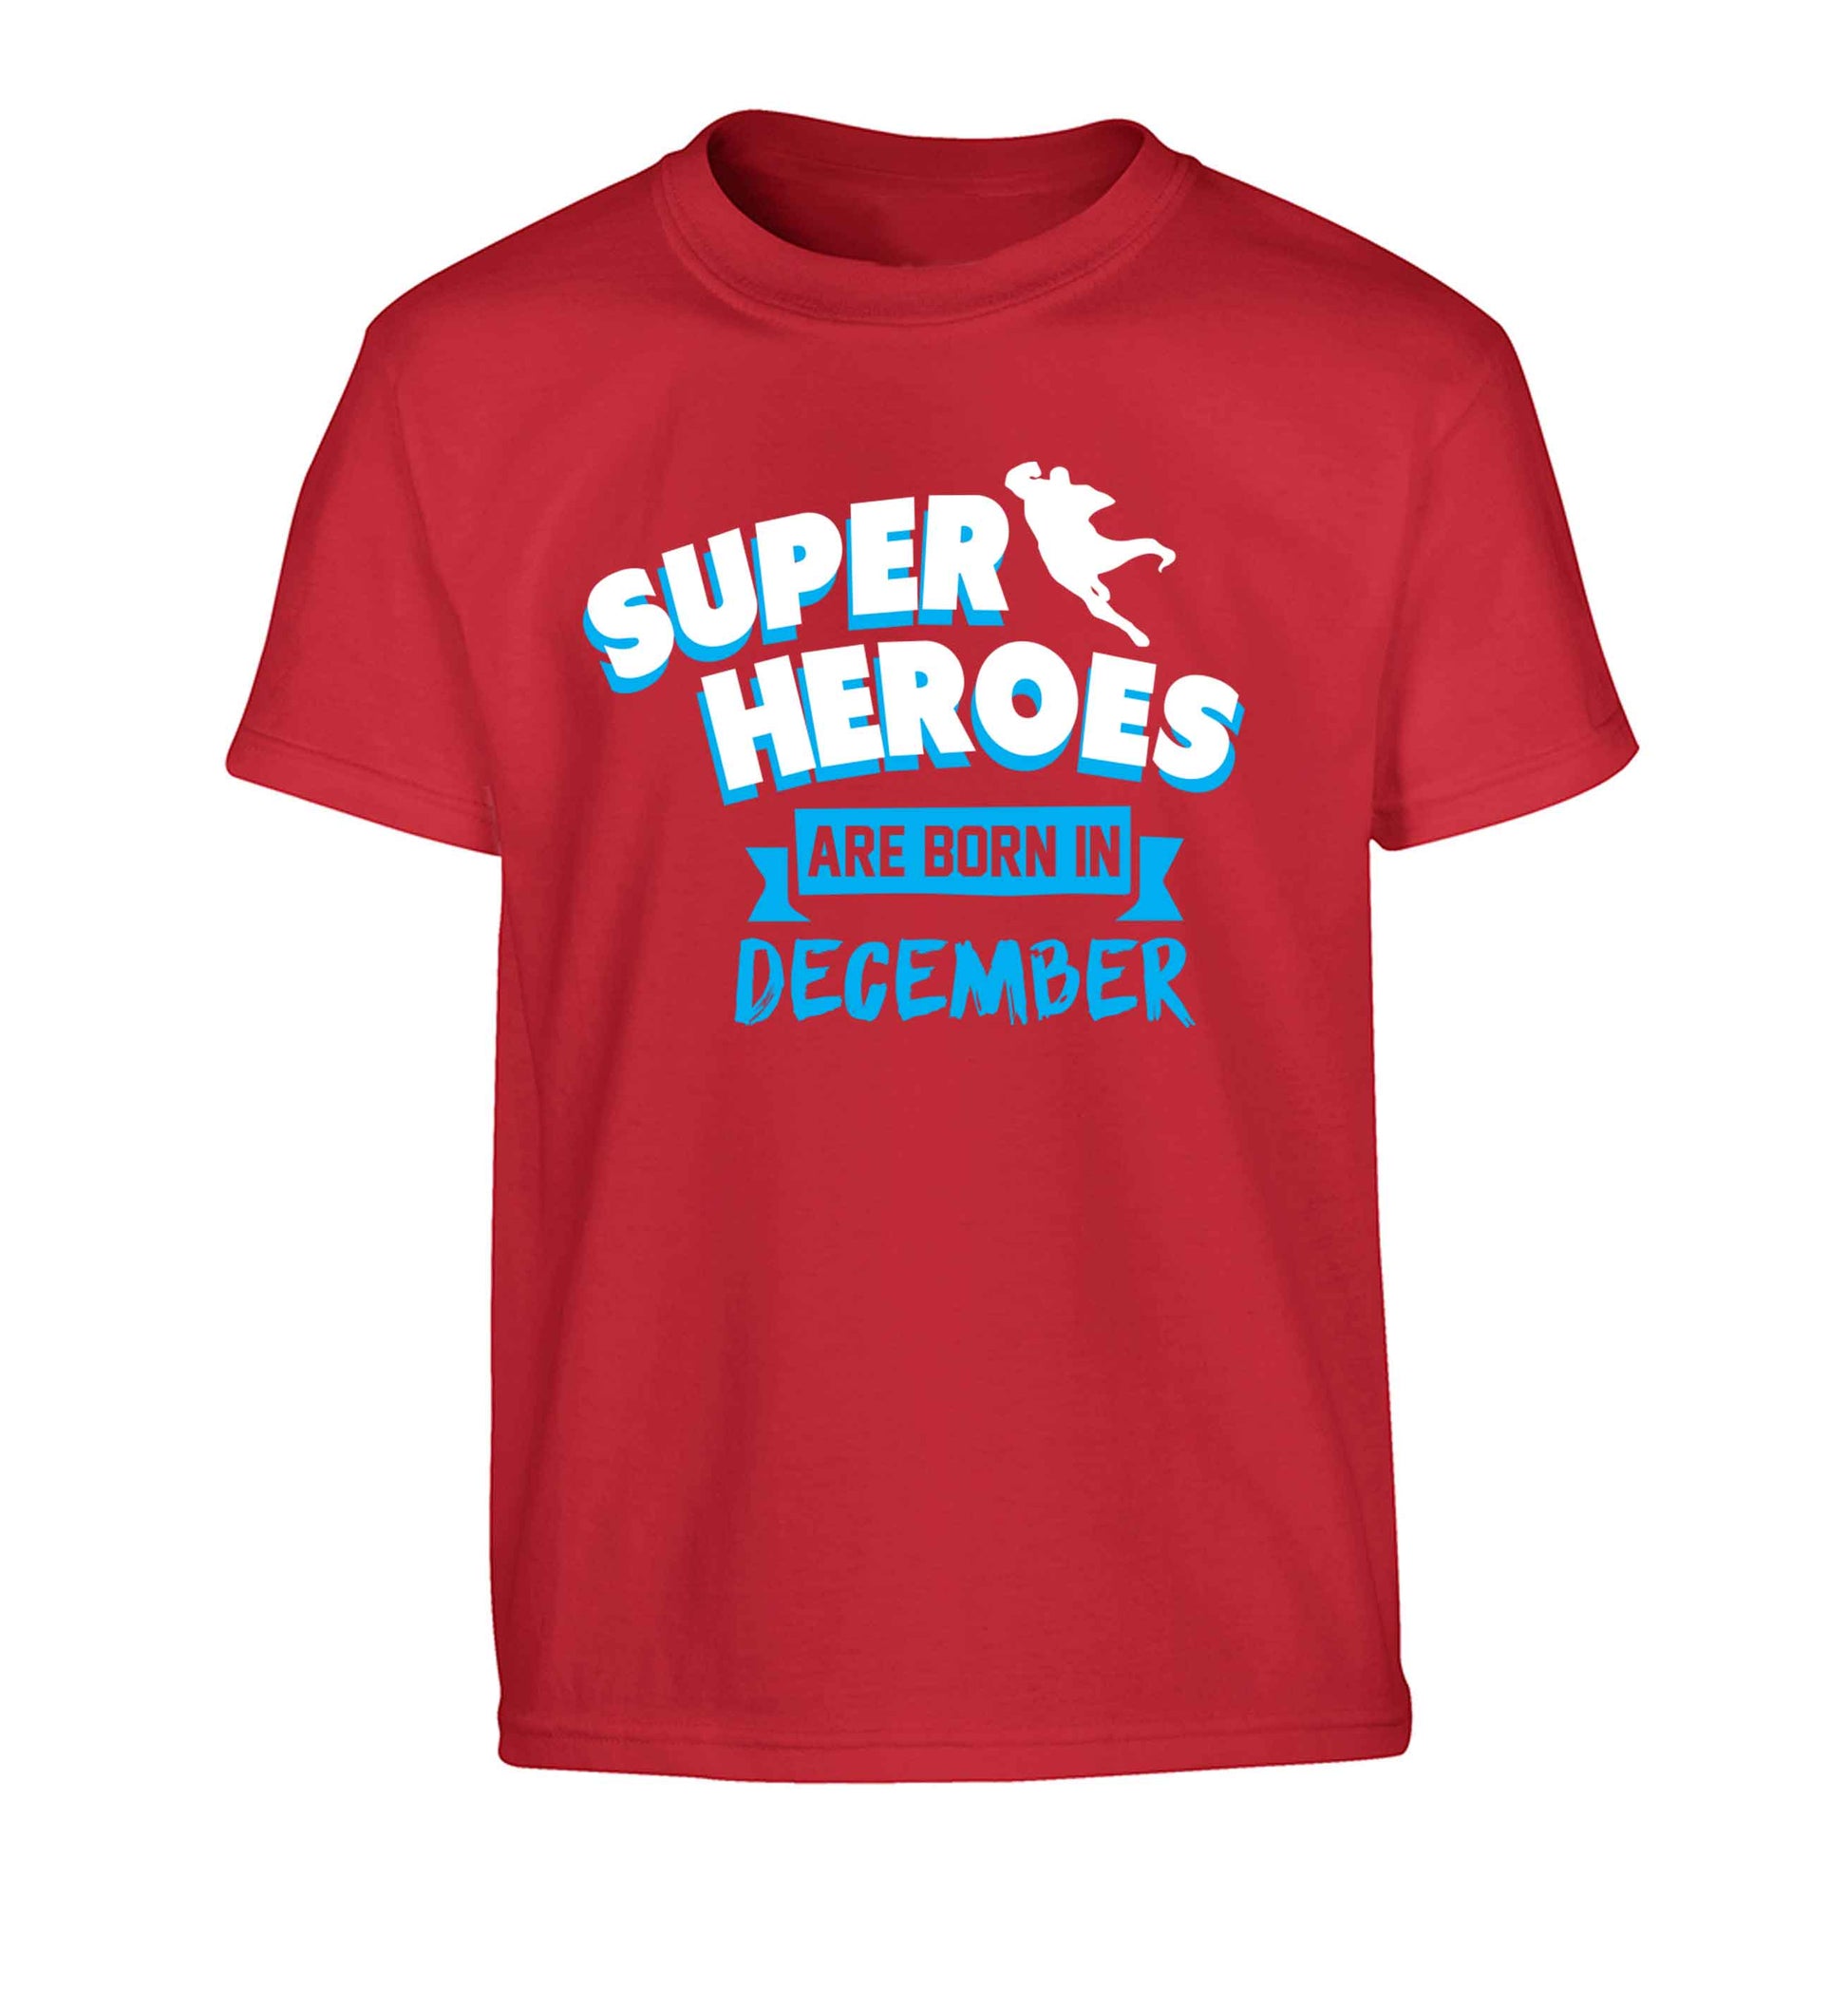 Superheroes are born in December Children's red Tshirt 12-13 Years